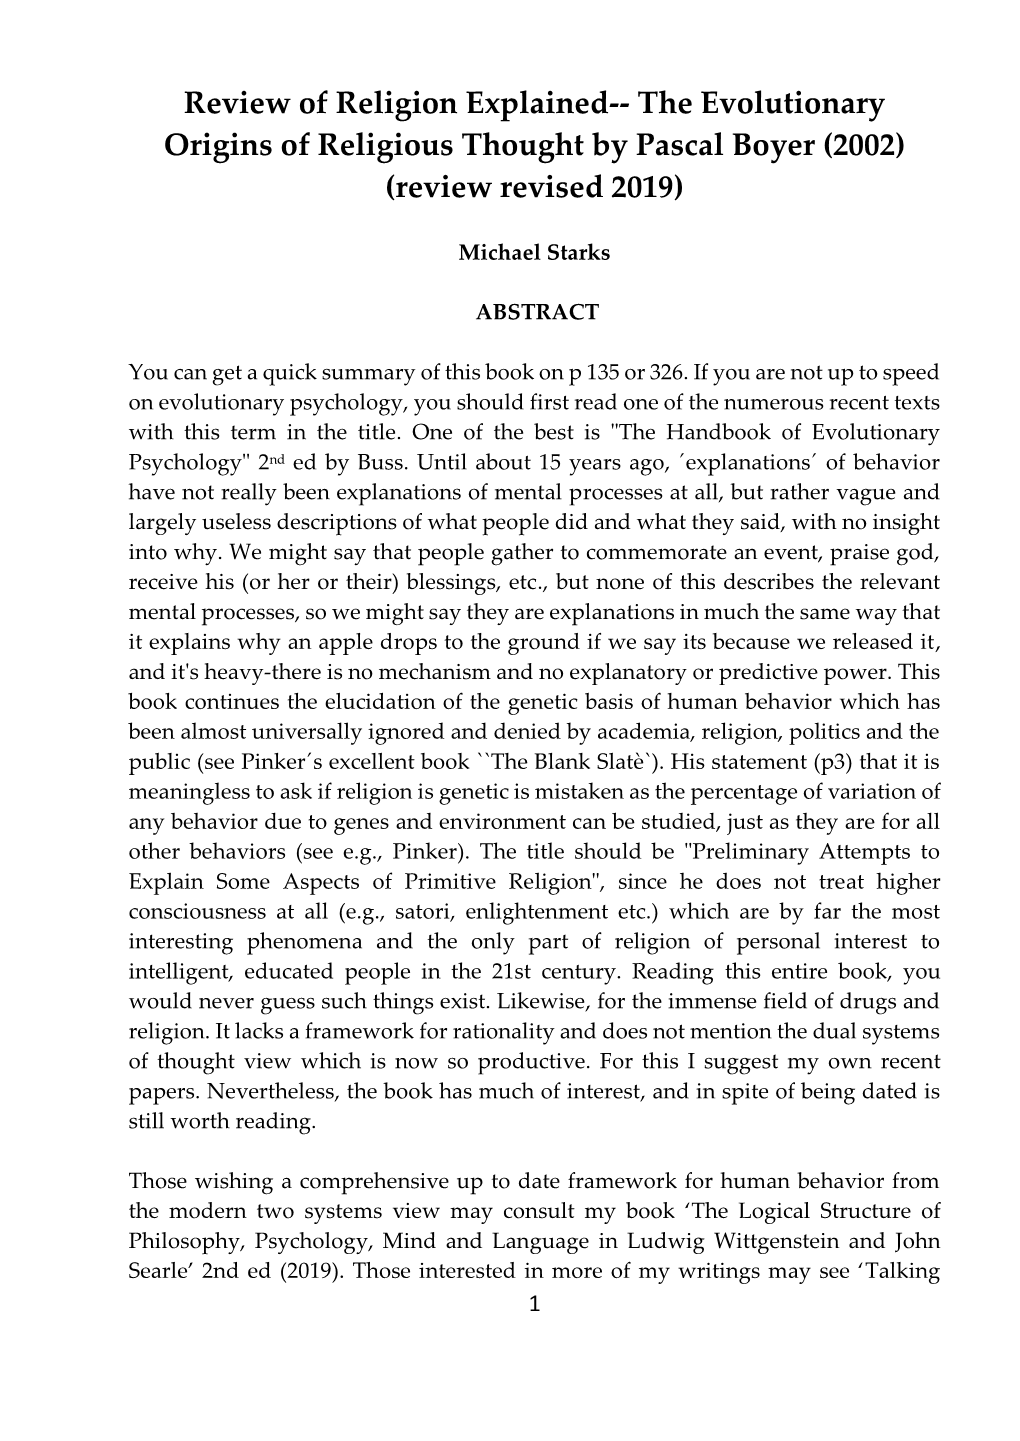 Review of Religion Explained-- the Evolutionary Origins of Religious Thought by Pascal Boyer (2002) (Review Revised 2019)